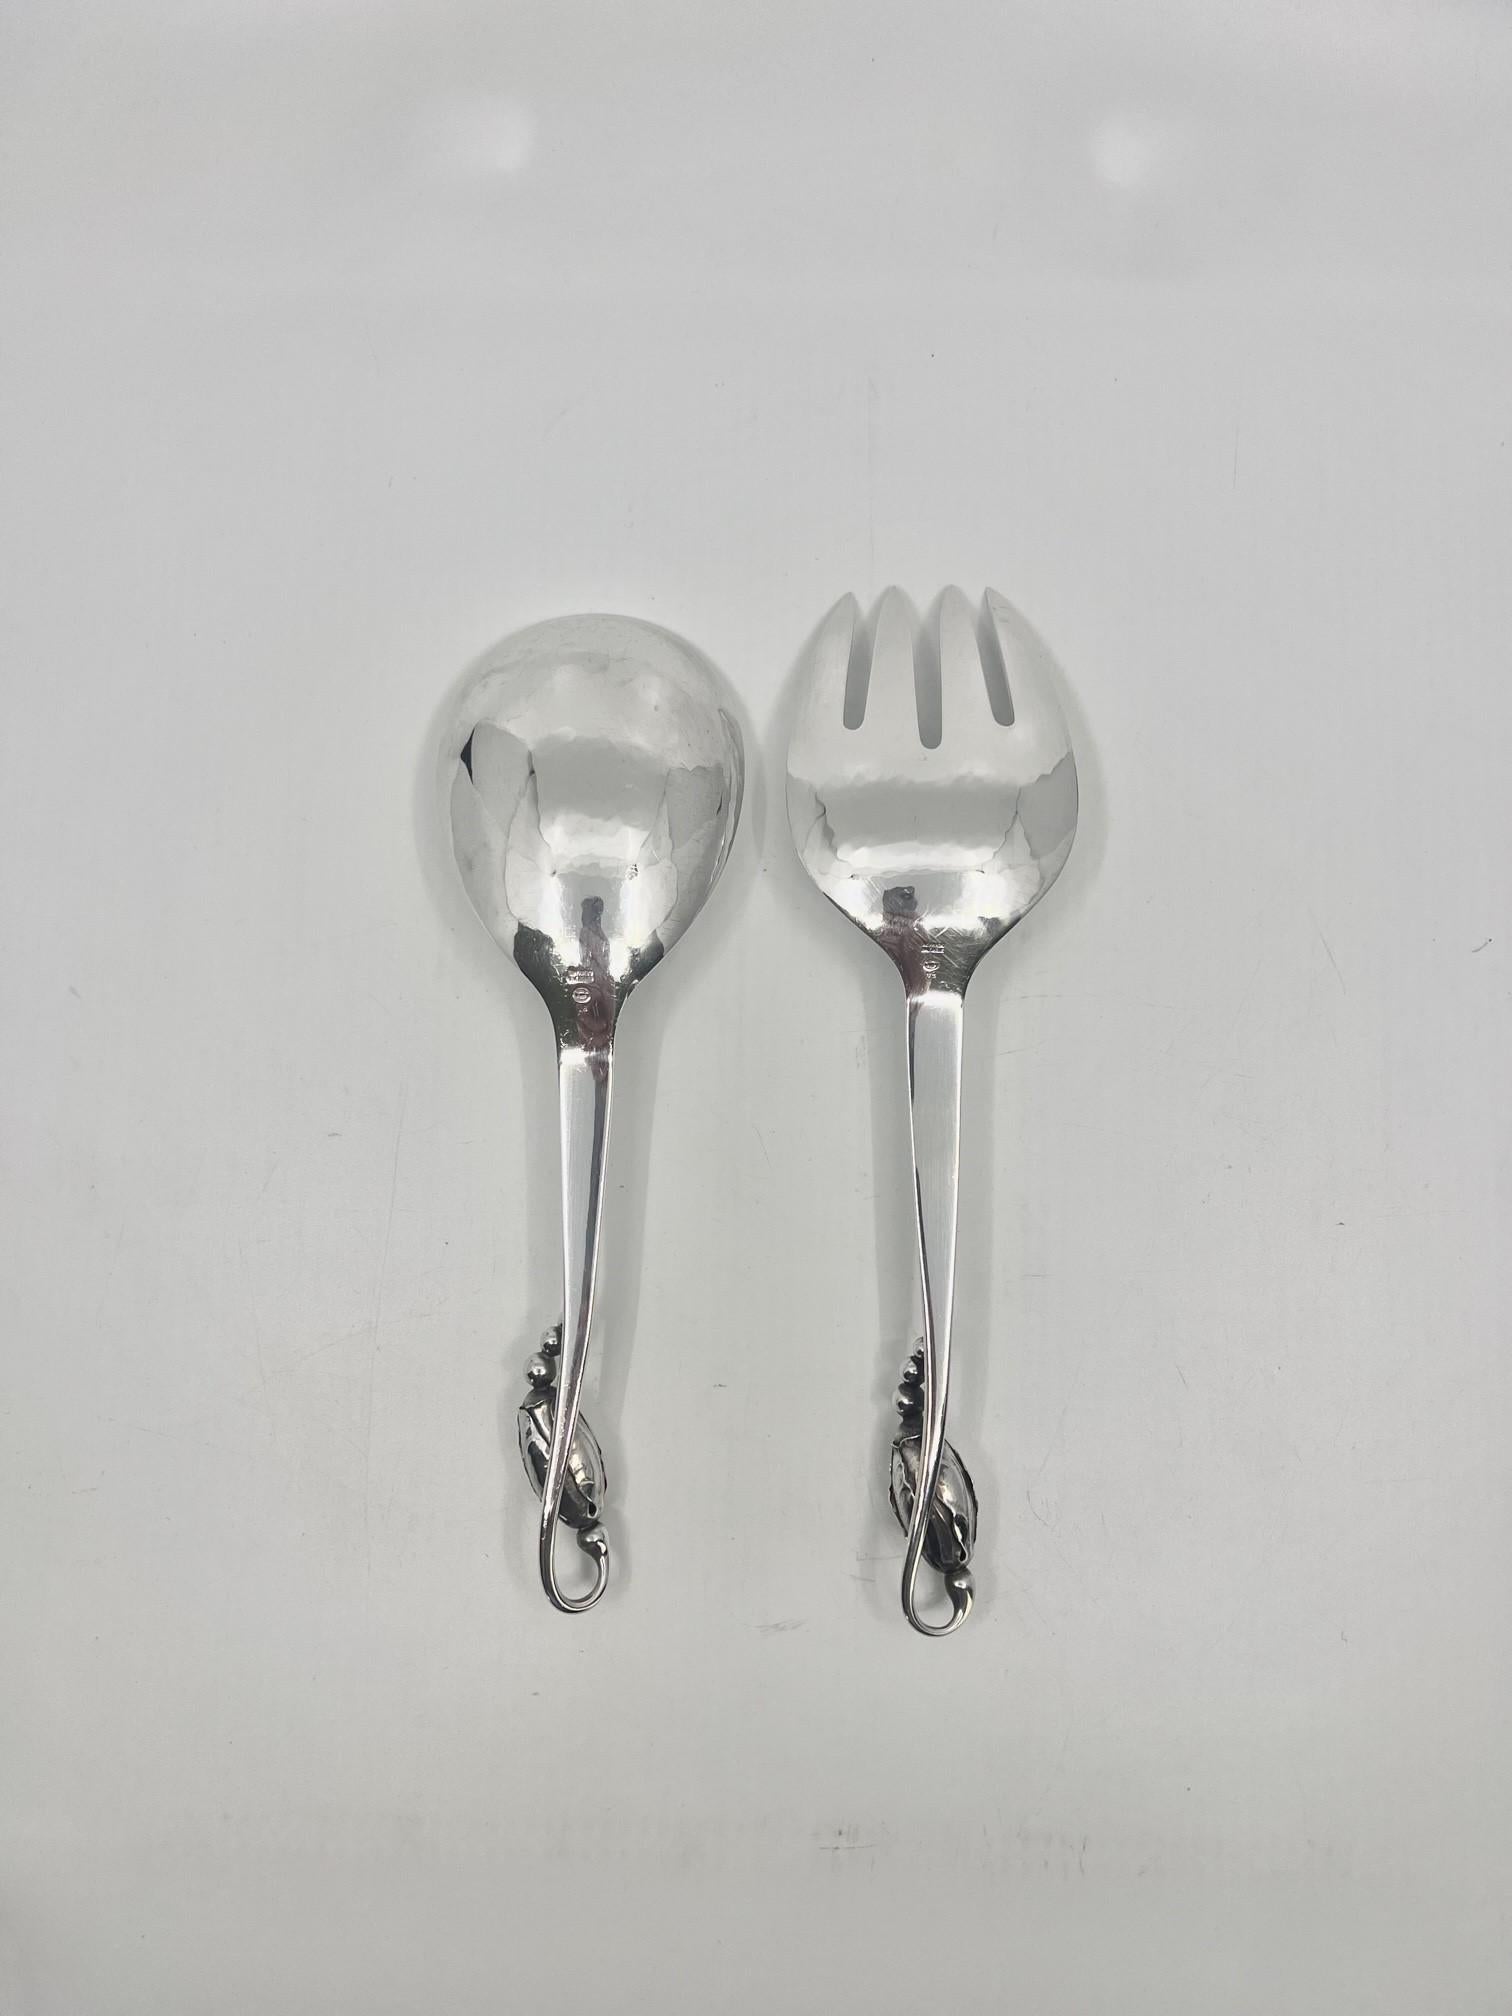 A vintage Georg Jensen Sterling Silver medium size serving set, items #113 & #114 in the Blossom pattern, design #84 by Georg Jensen from 1919.

Dimensions: The spoon measures 8 9/16″ (21.7cm) in length, the fork is 9 1/8″ (22,3cm), which attests to